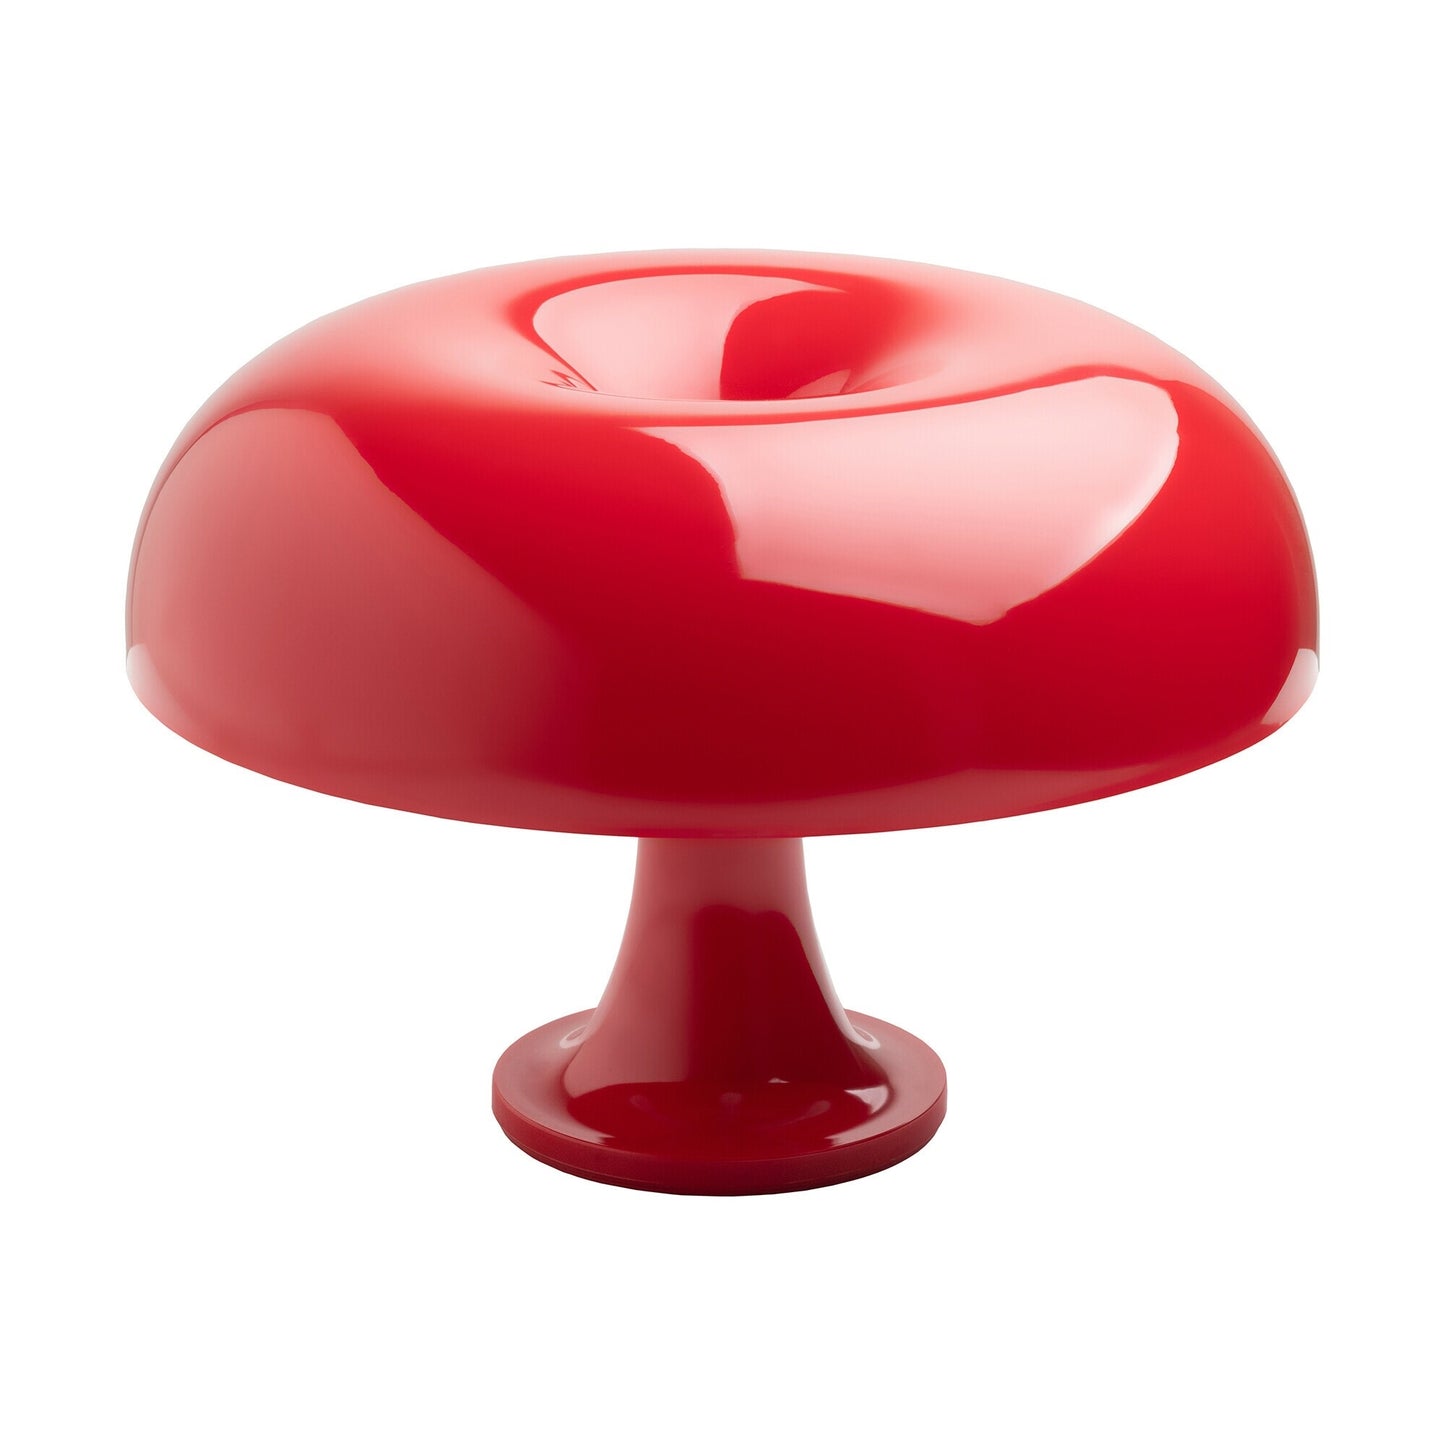 Nessino Table Lamp by Artemide #Red